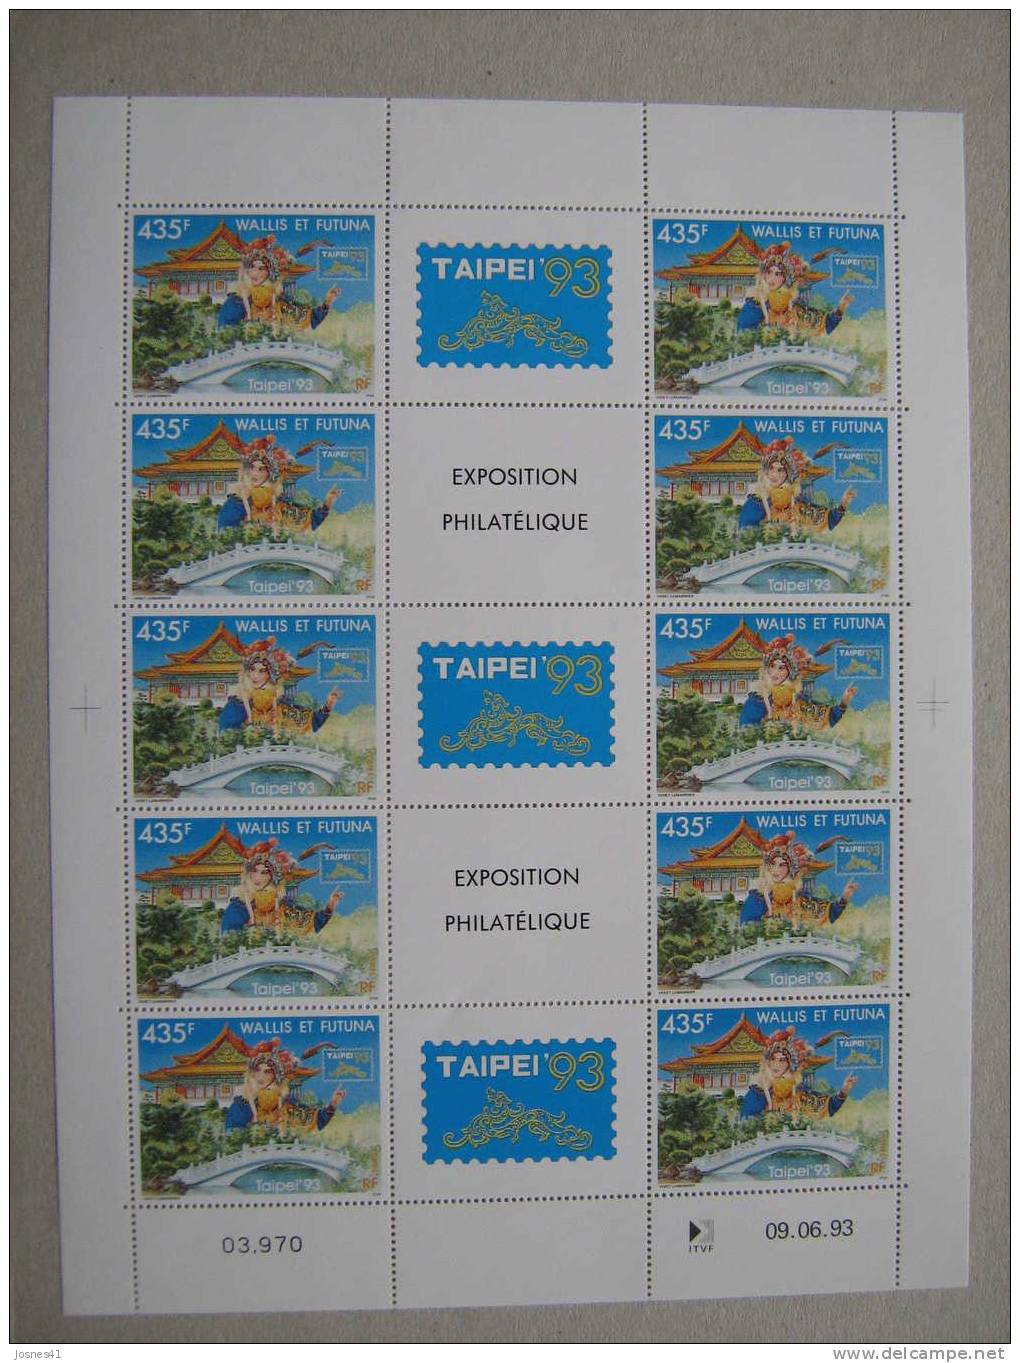 WALLIS ET FUTUNA   P 454 A * * TAIPEI 93 Feuille Entiere  2 LOGOS DIFFERENTS - Unused Stamps